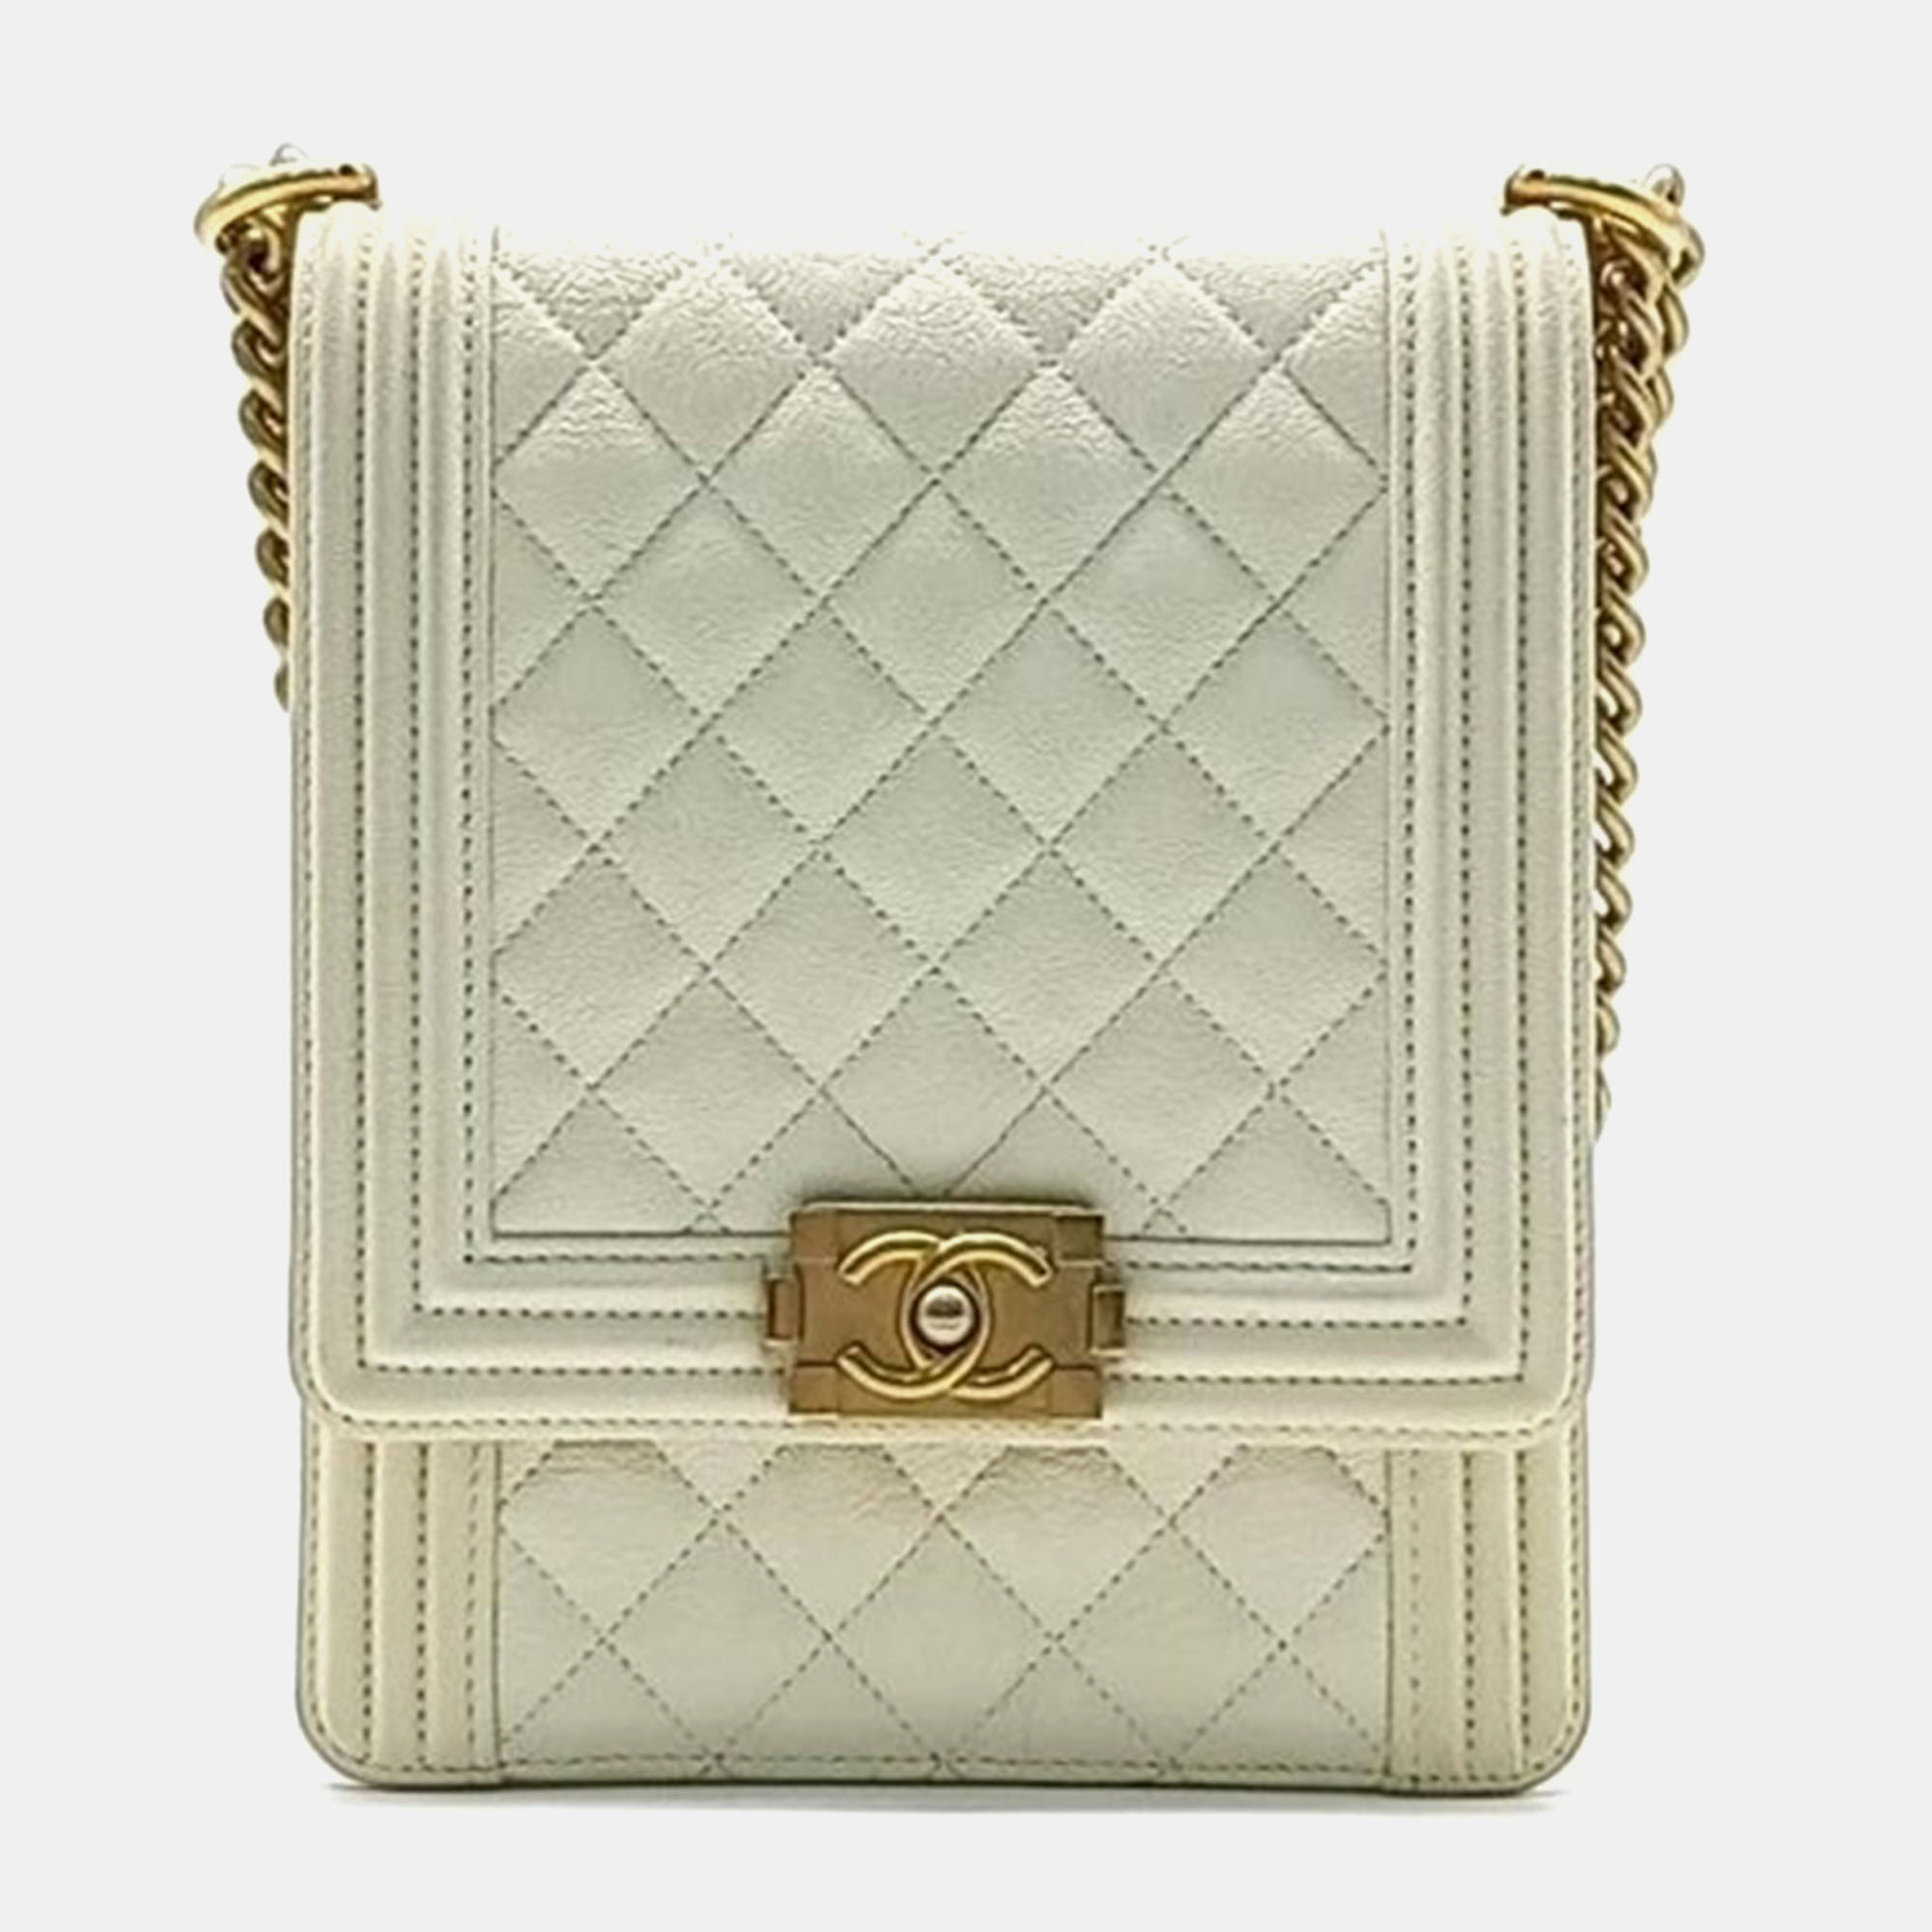 

Chanel Ivory Caviar Leather North/South Boy Flap Bag, White